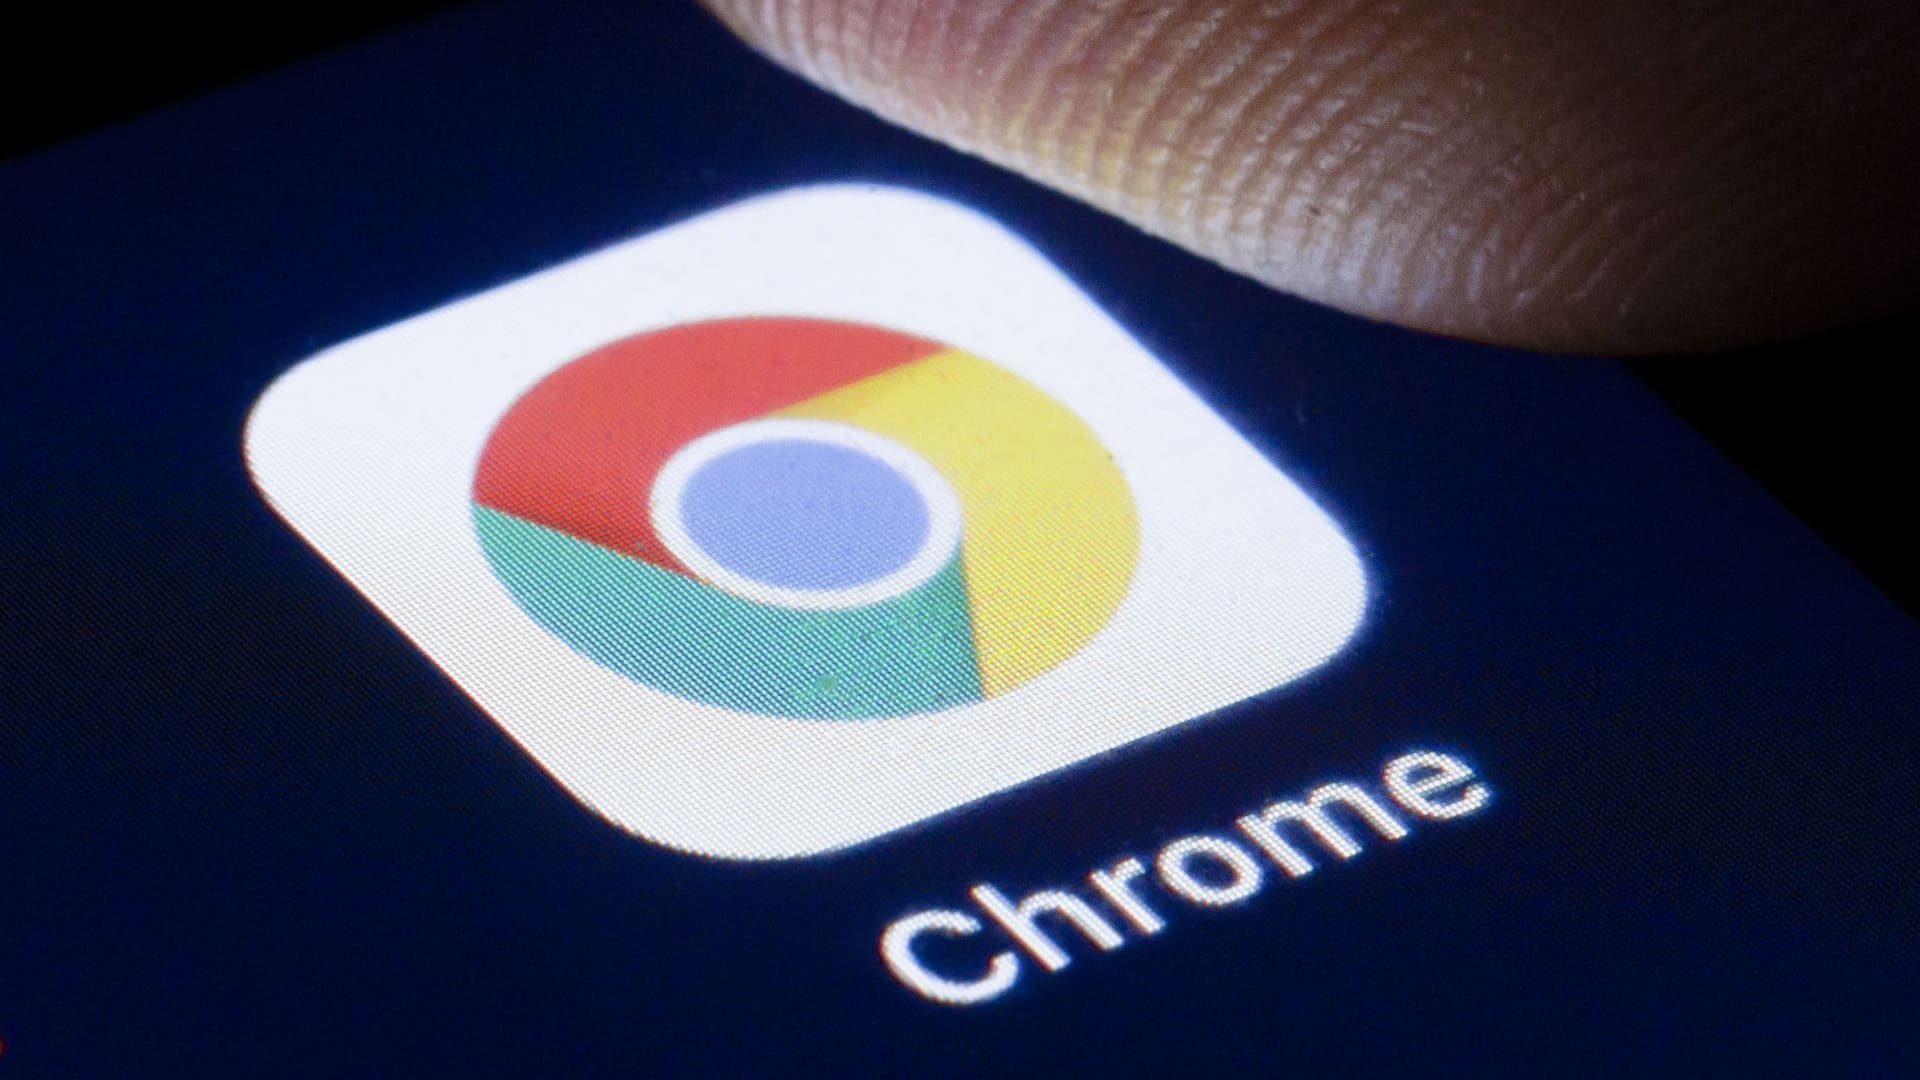 These two new Google Chrome features will help save battery life and speed up computer performance